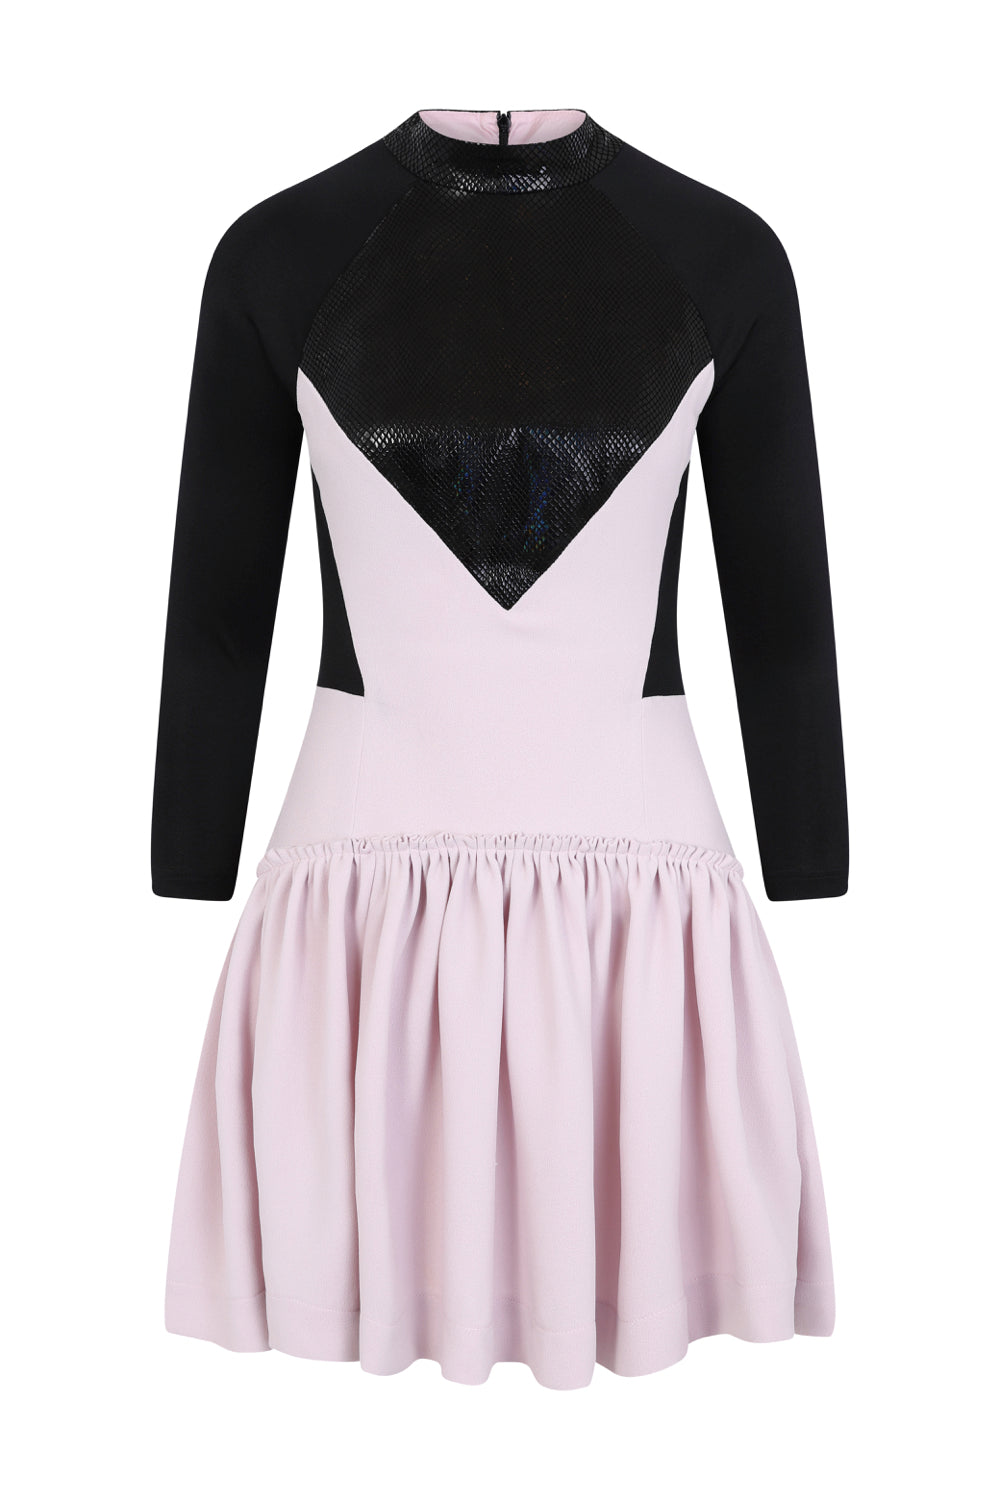 pink and black dress with frill